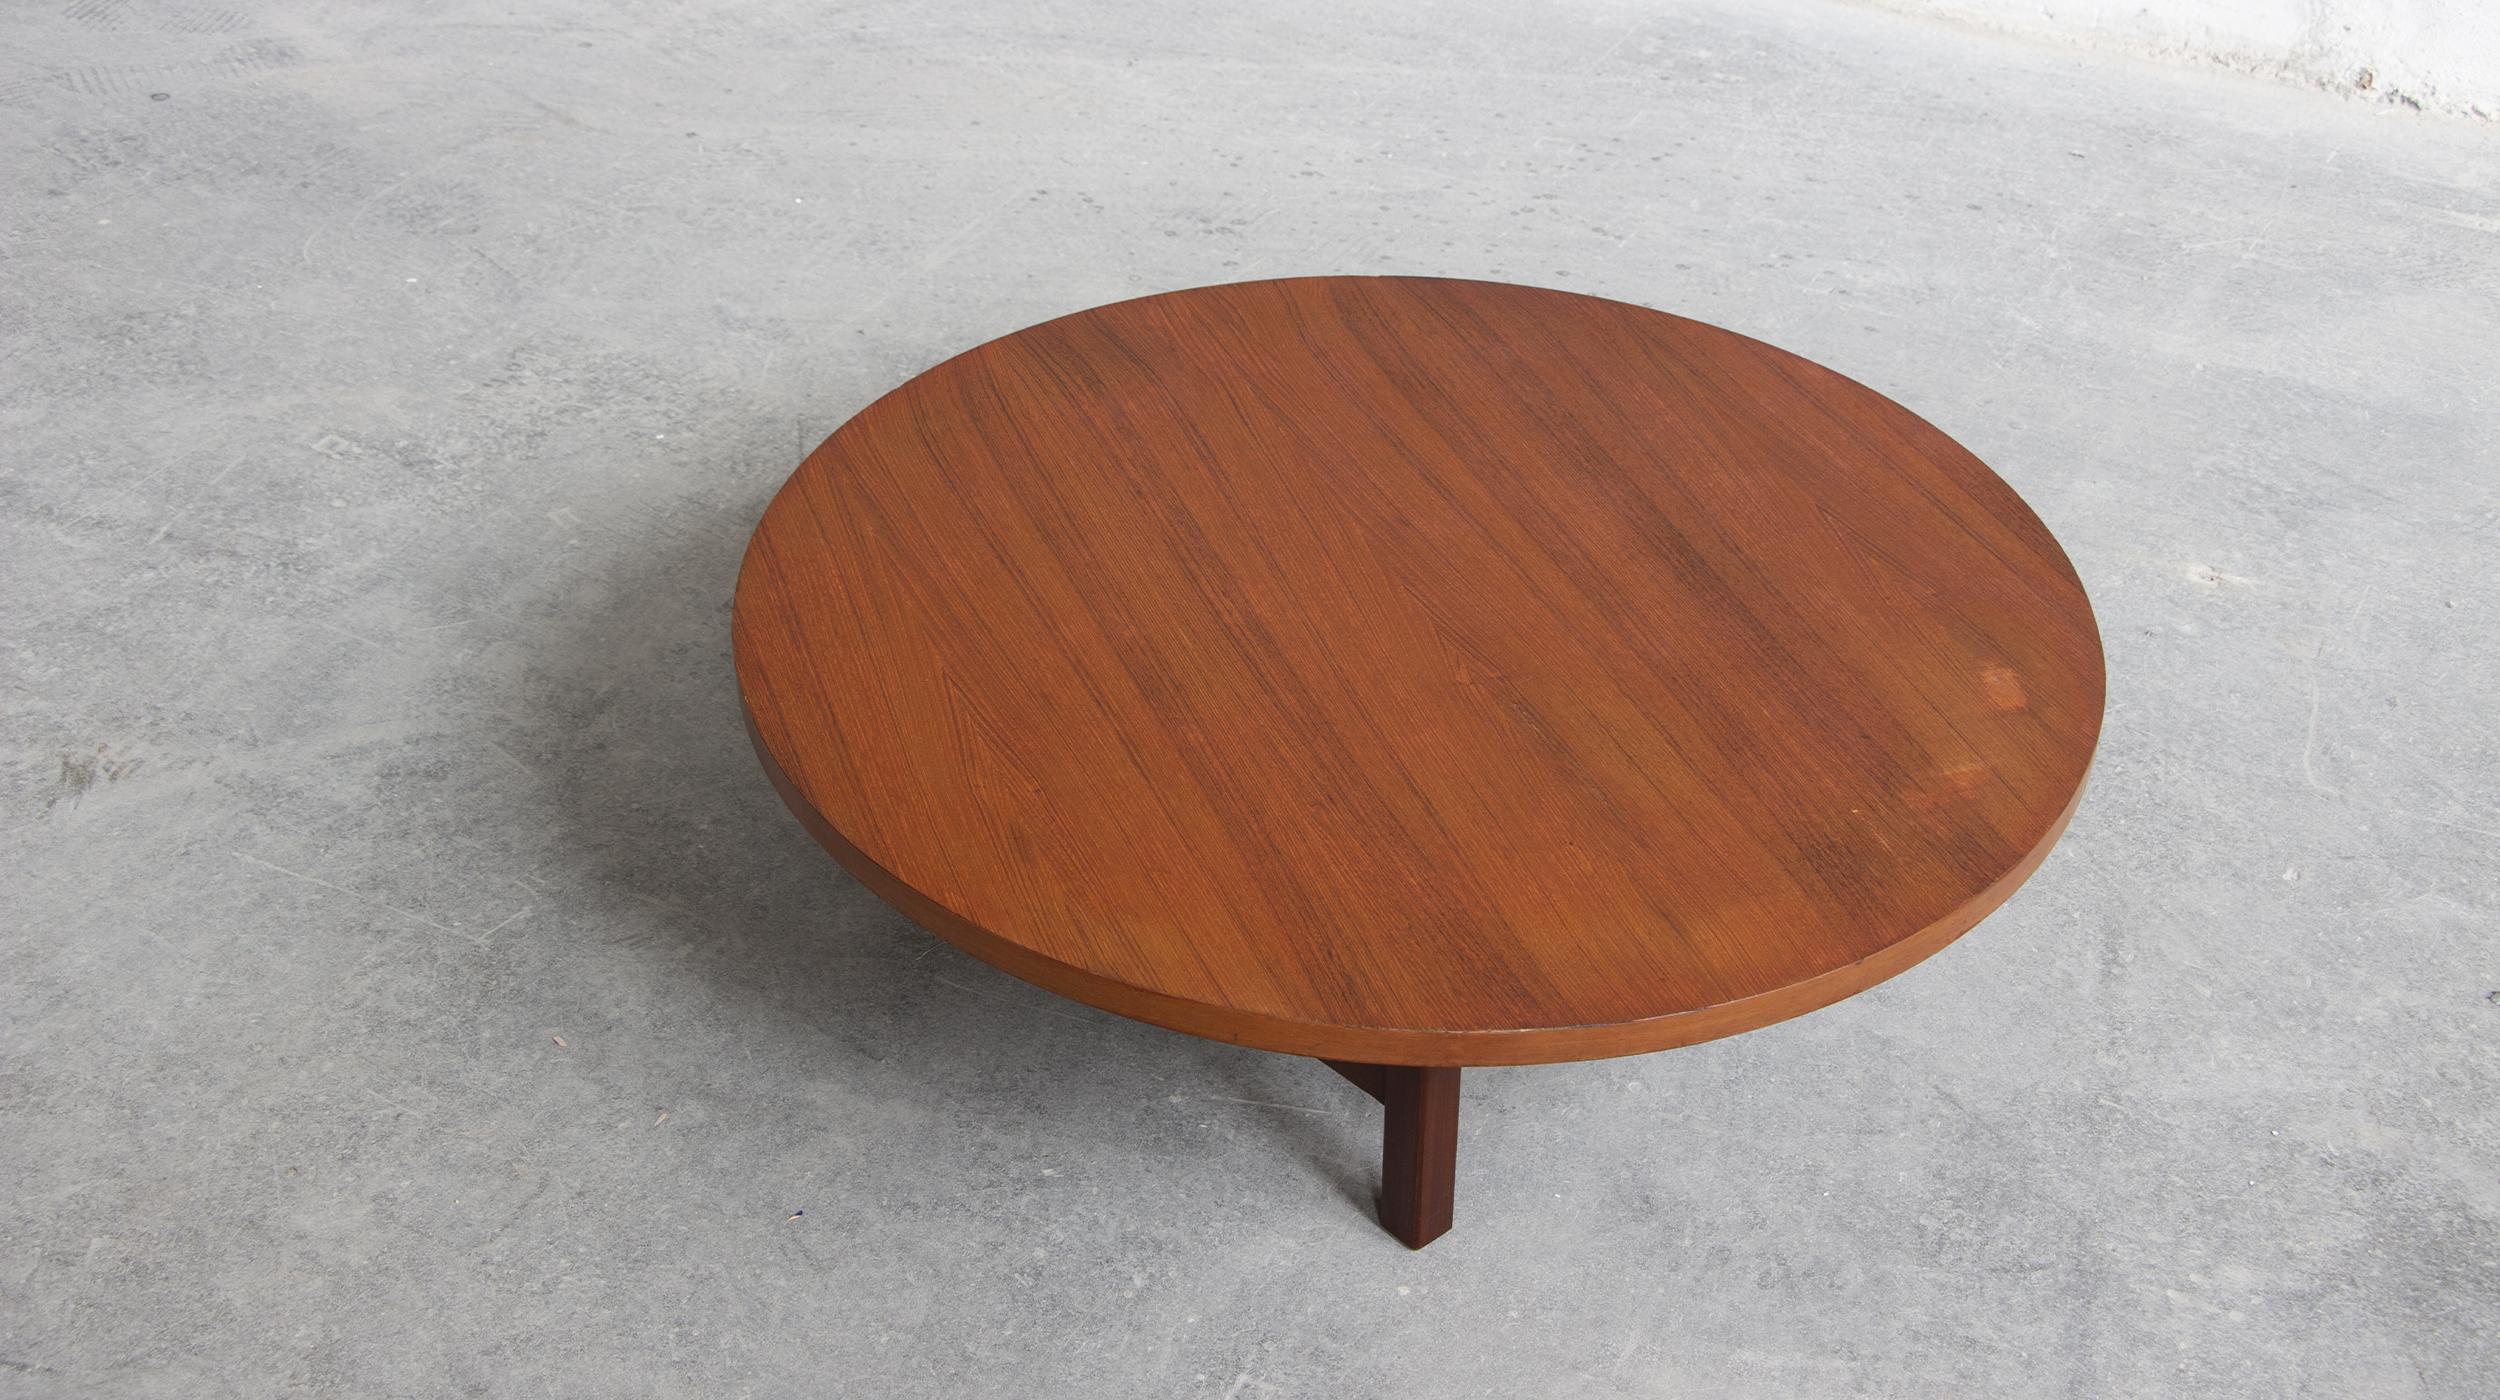 Round coffee table of the 60s from the Italian publisher ISA Bergamo. 

This one produced in the 50s and 60s many pieces of furniture by Sergio Rodriguez and Gio Ponti: armchairs, lounge chairs, sofas and the famous hexagonal tables.

This one